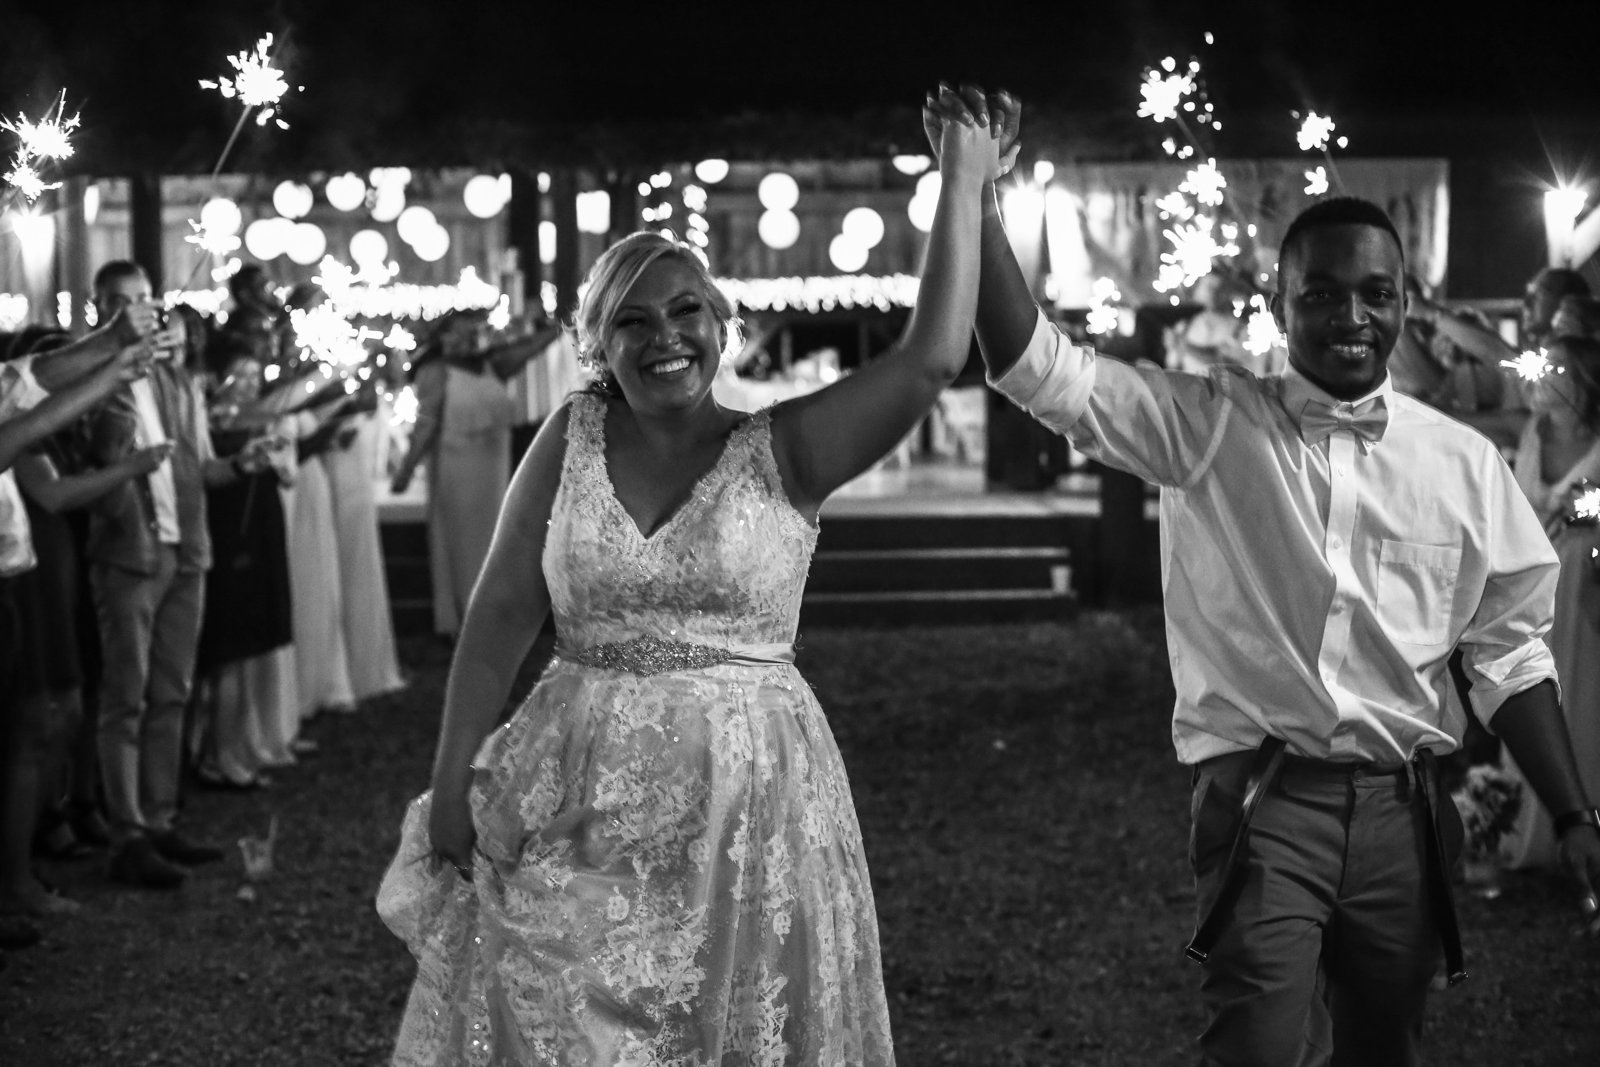 Guests hold sparklers as bride and groom leave Betsy's Barn wedding